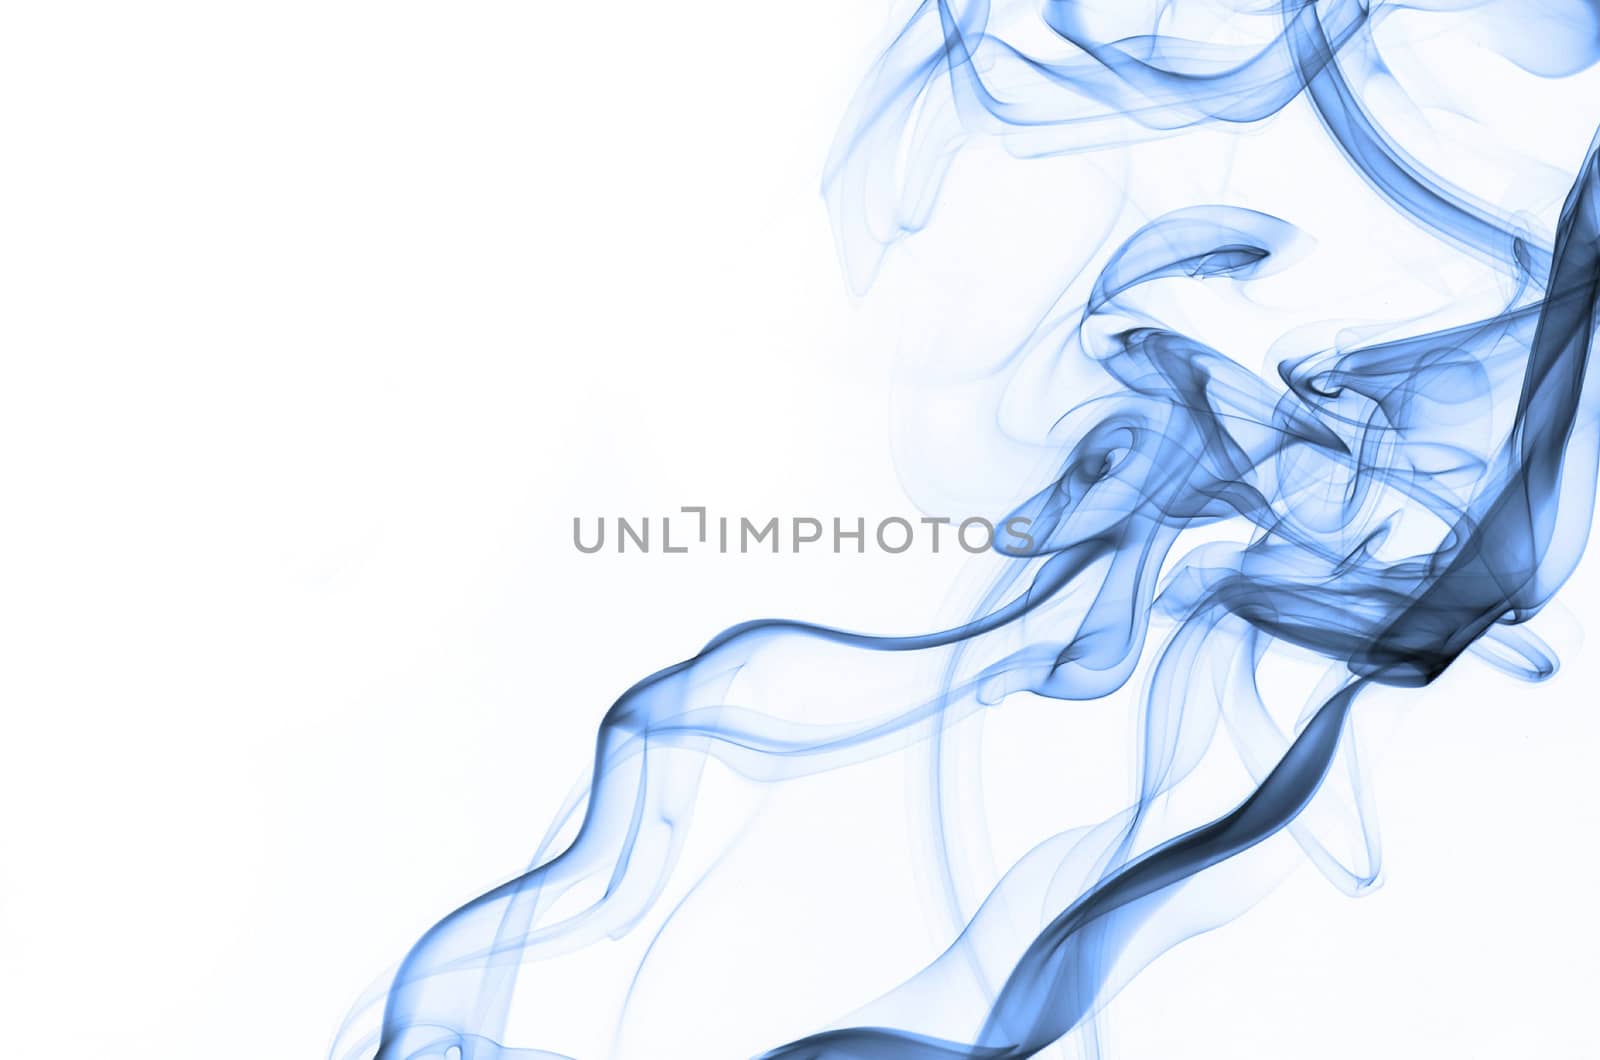 Smoke swirling on white background, visible feature face with long tongue

